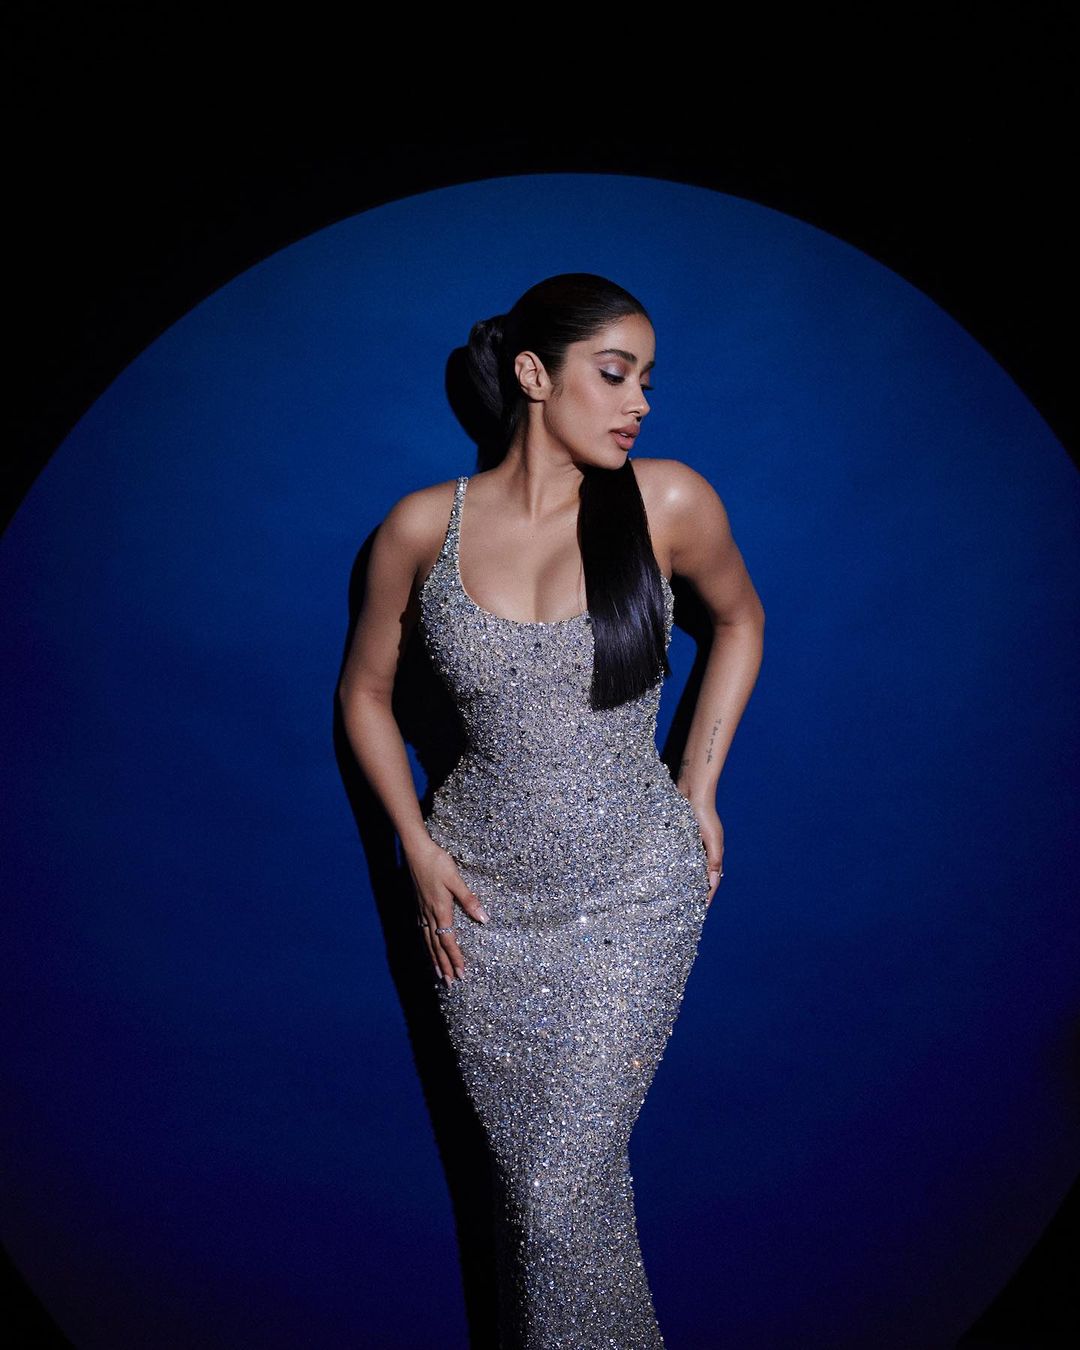 Janhvi Kapoor looks stunning in the sequinned dress with a plunging neckline